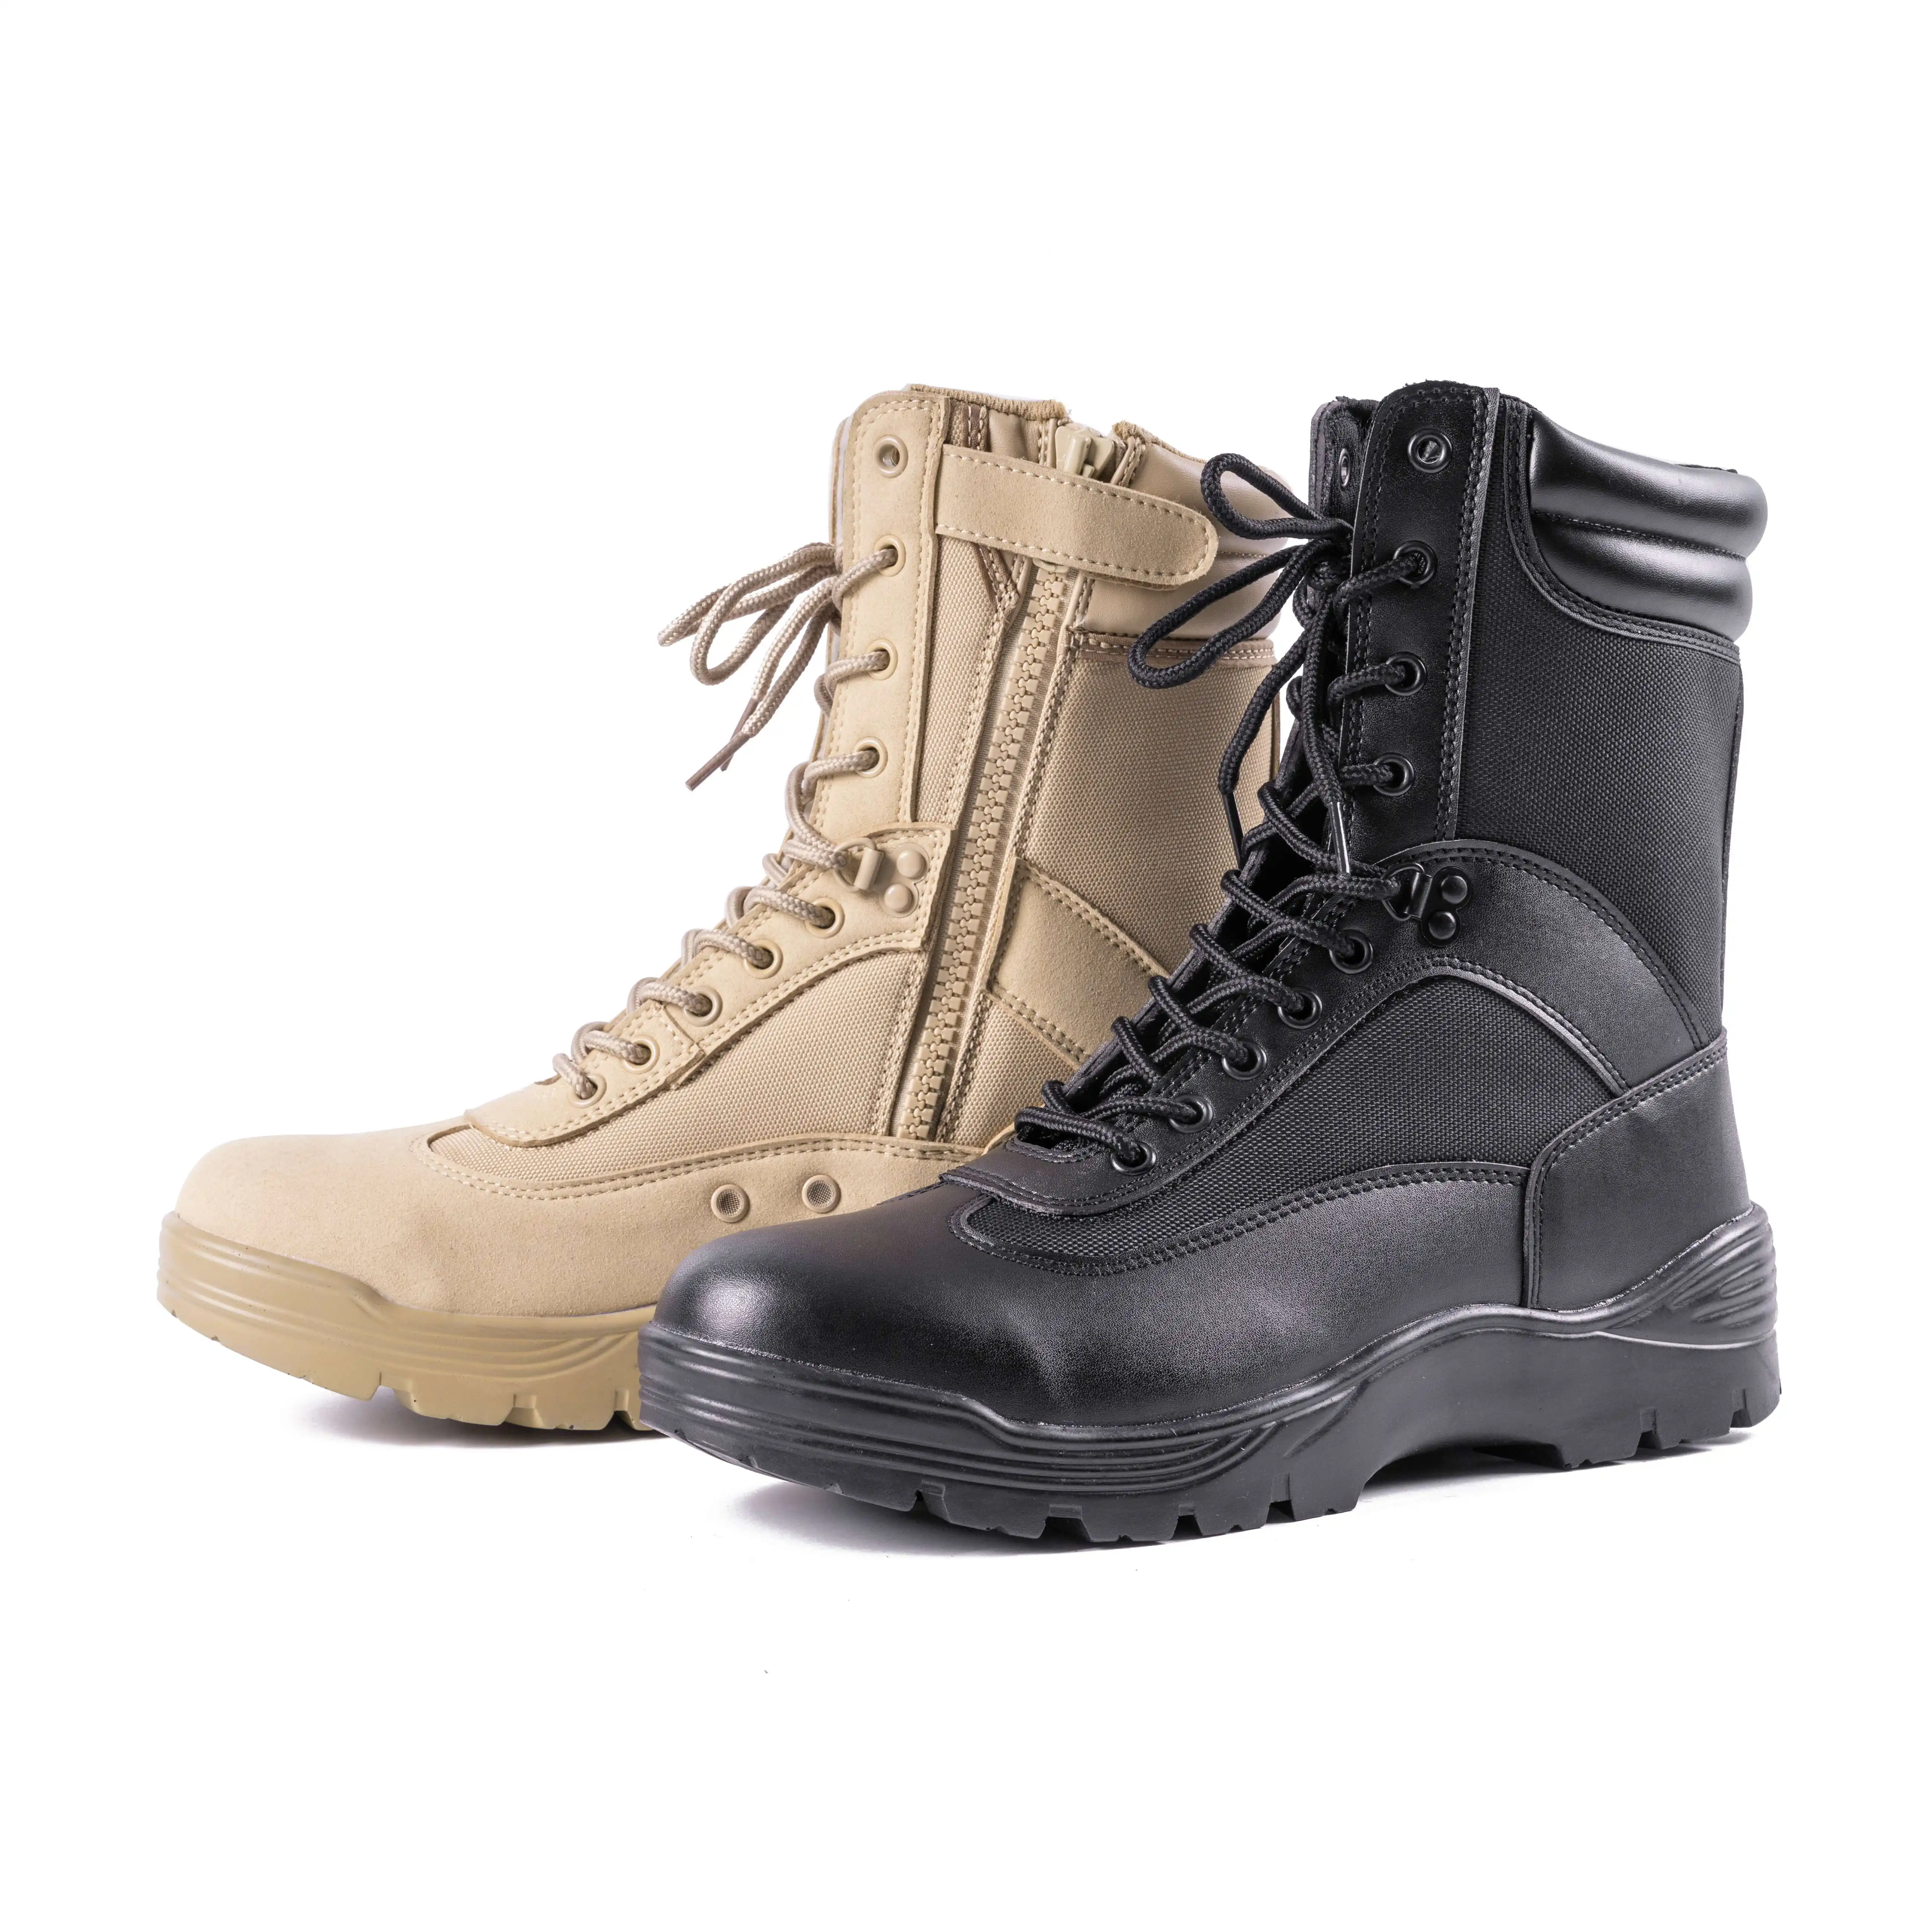 Waterproof Black Military Boot Hiking Boots Tactical Training Shoes PU Outsole Boots for men